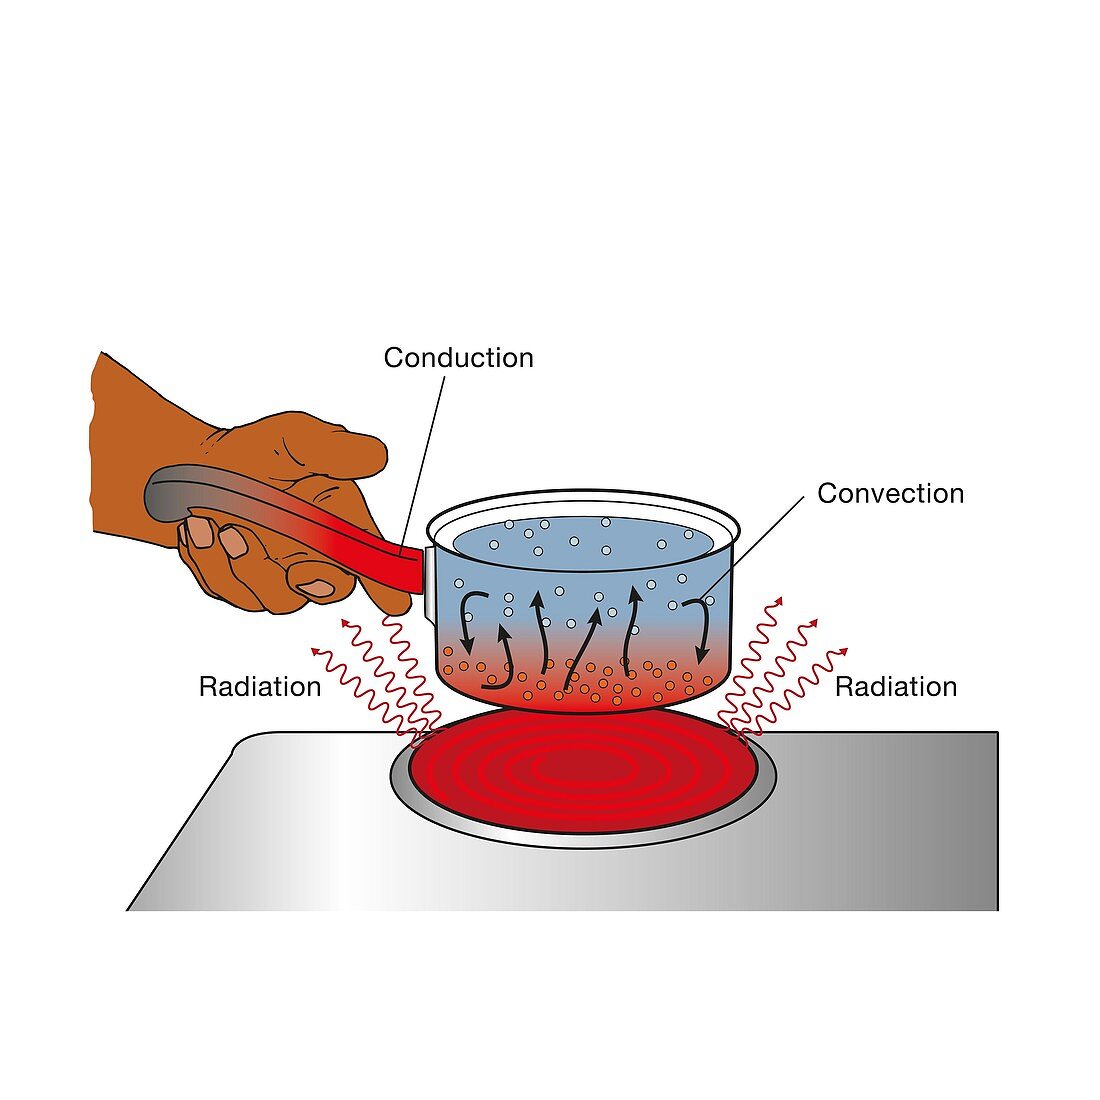 Heat transfer in a pan on a stove, illustration